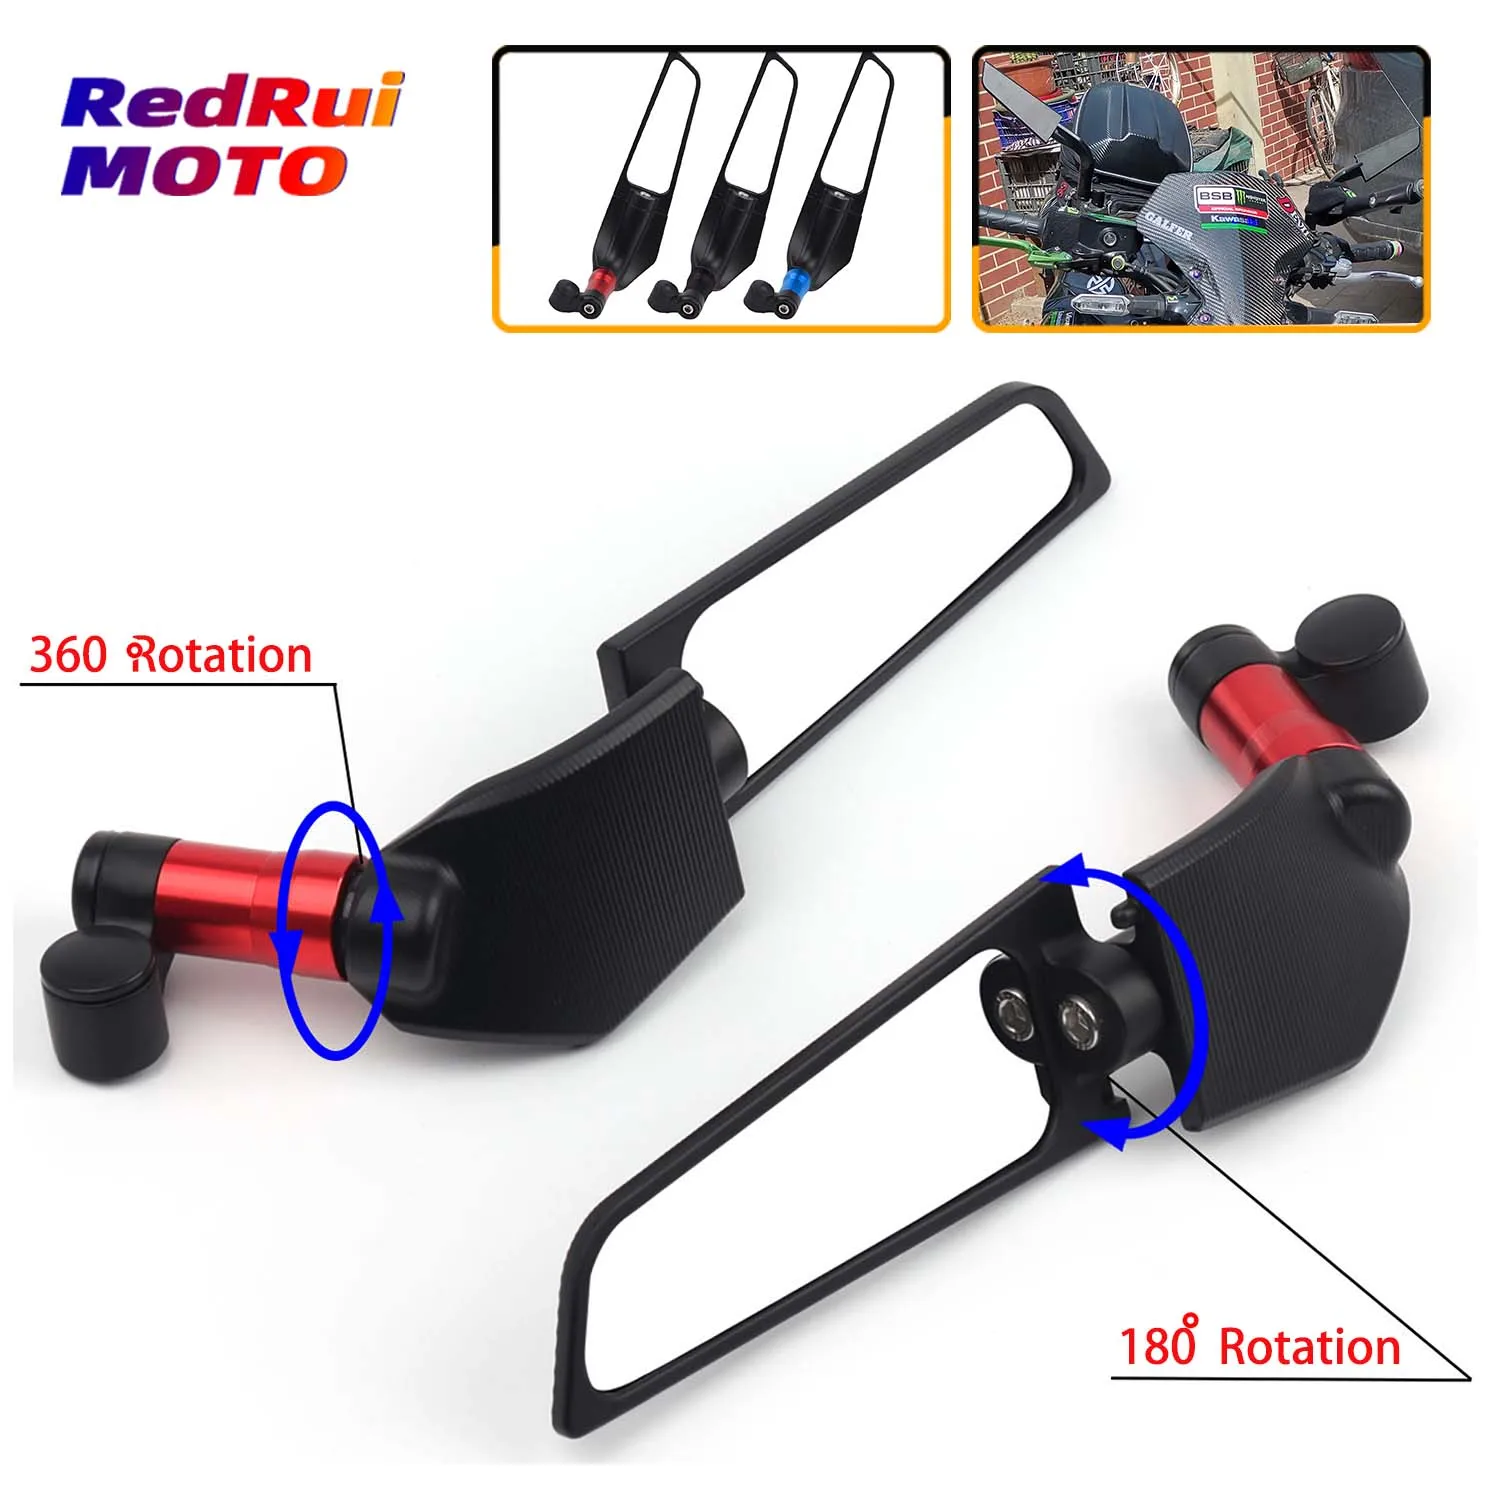 

Universal New fixed wind wing for Suzuki GSX750 GSX1400 SV650 SV1000 SFV650 GLADIUS motorcycle Rotating rearview mirror